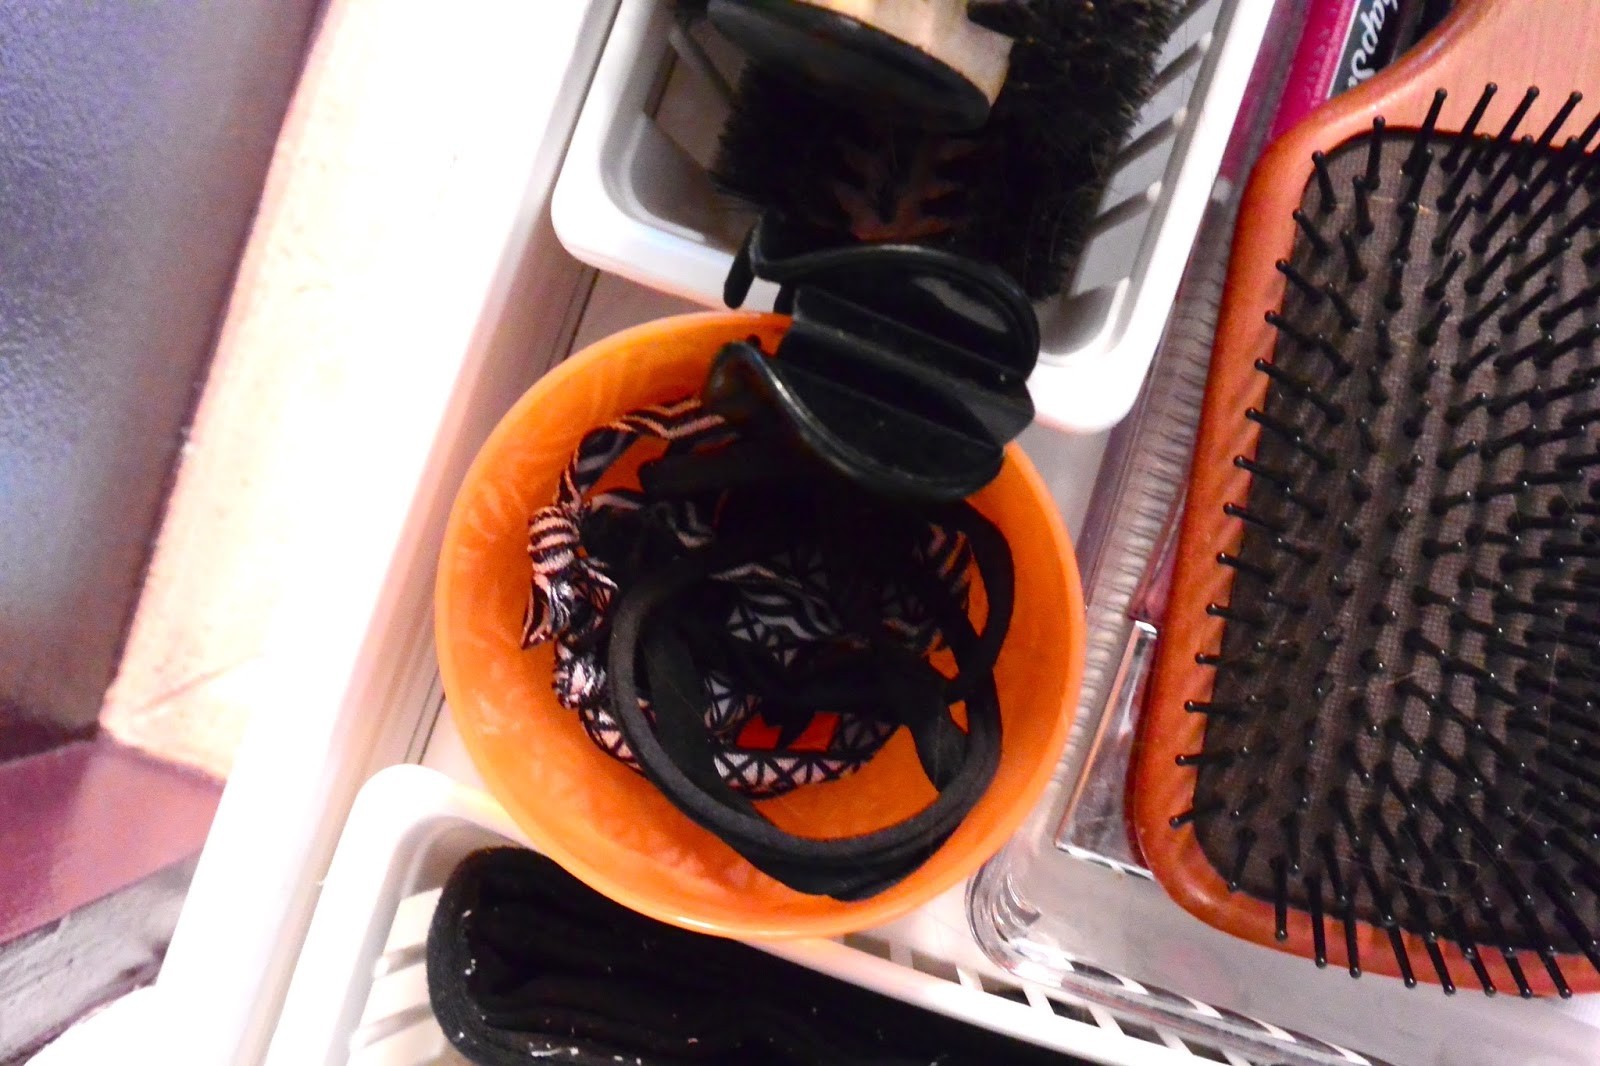 Hair ties stored in small kid's cup #drawerorganization